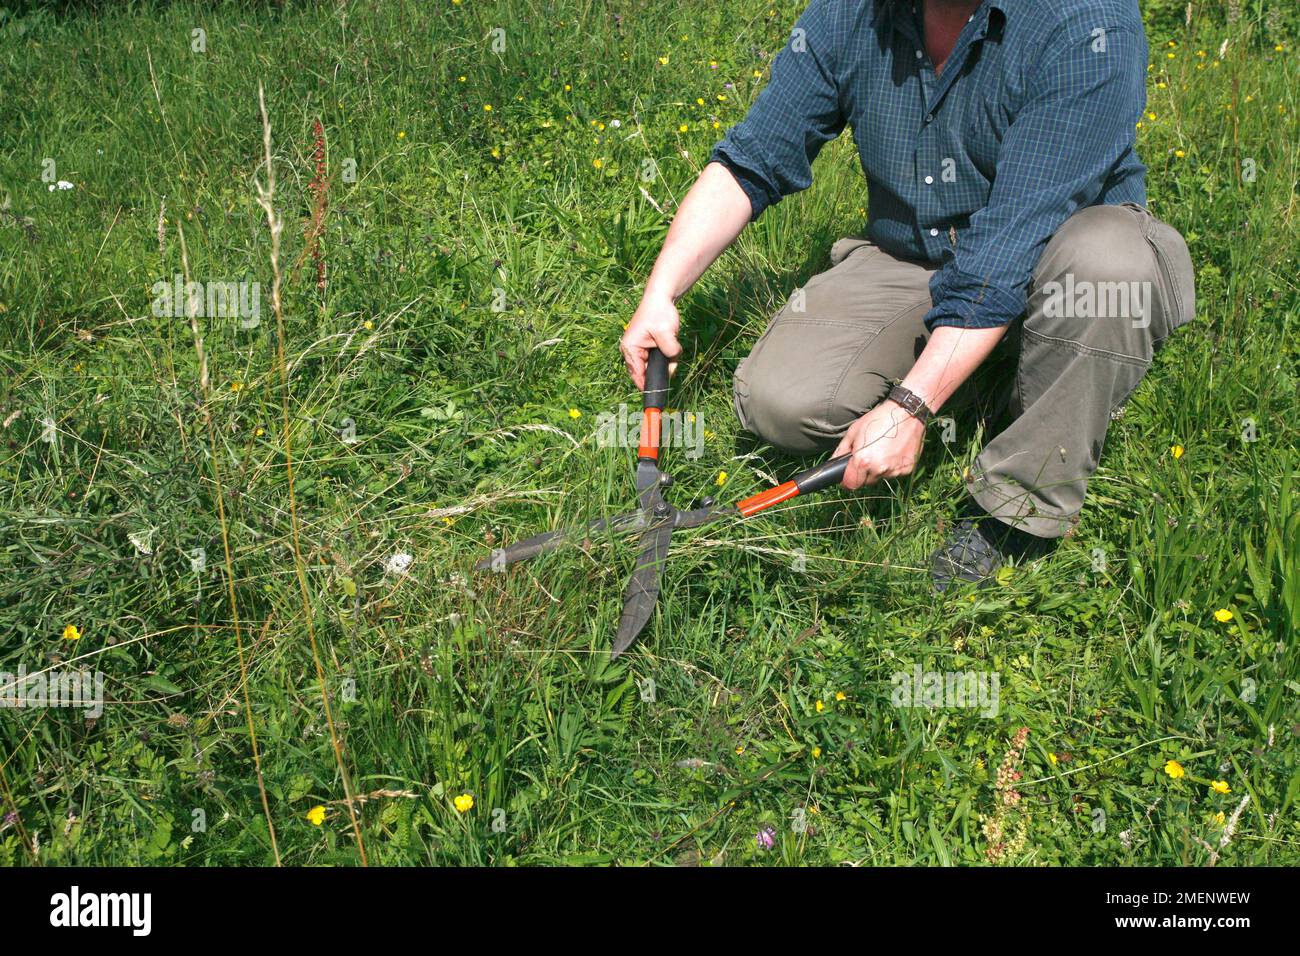 Man cutting grass with shears Stock Photo